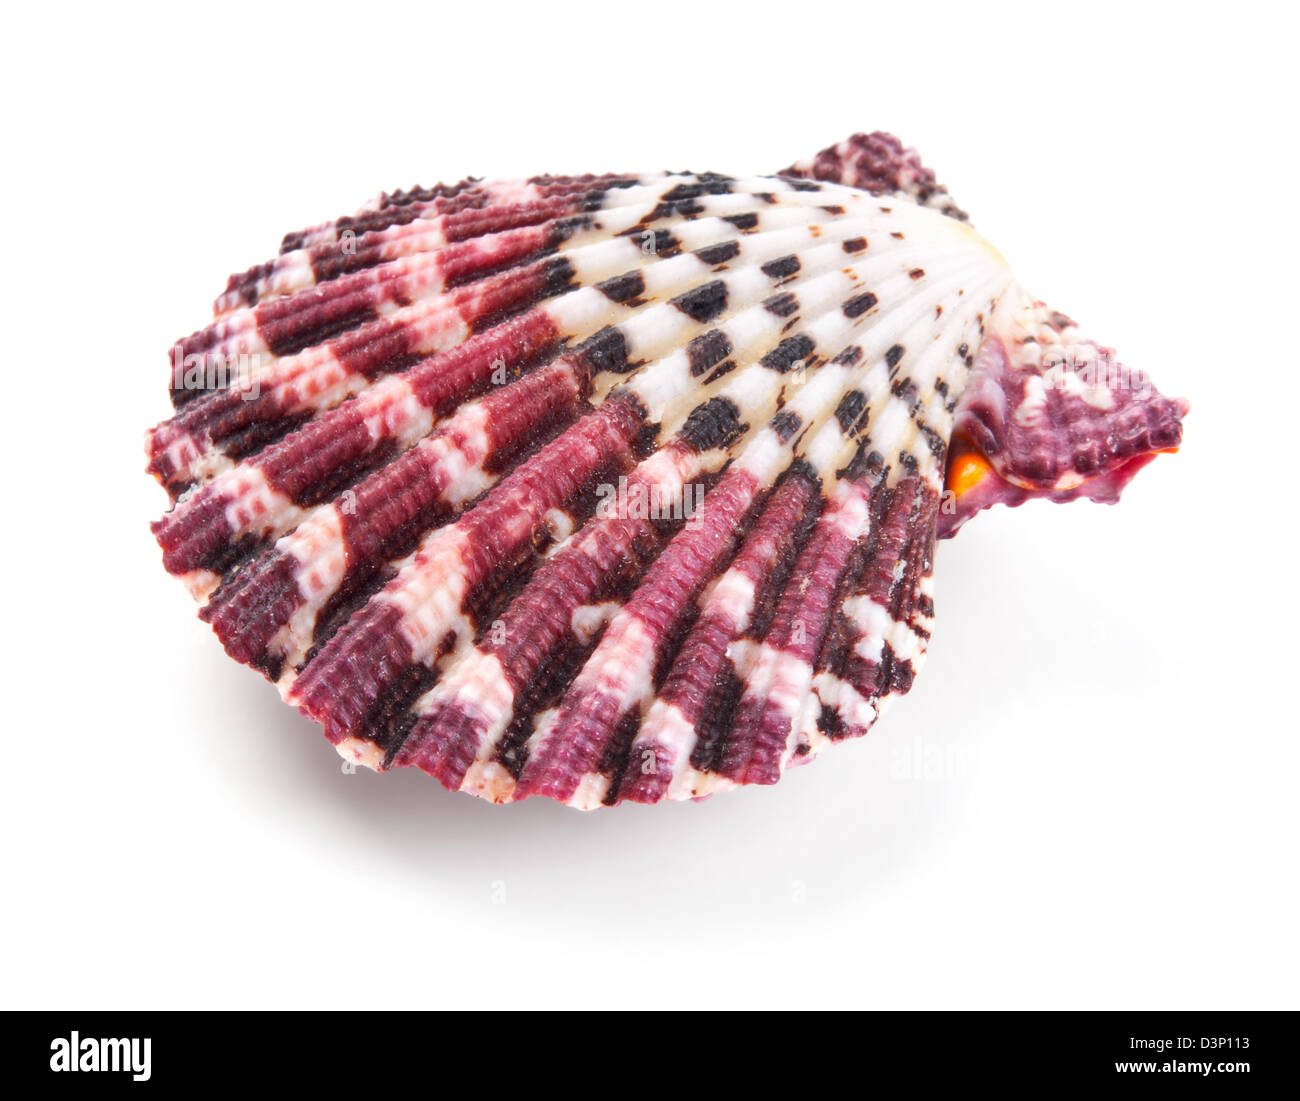 Seashell in close-up isolated on a white background Stock Photo